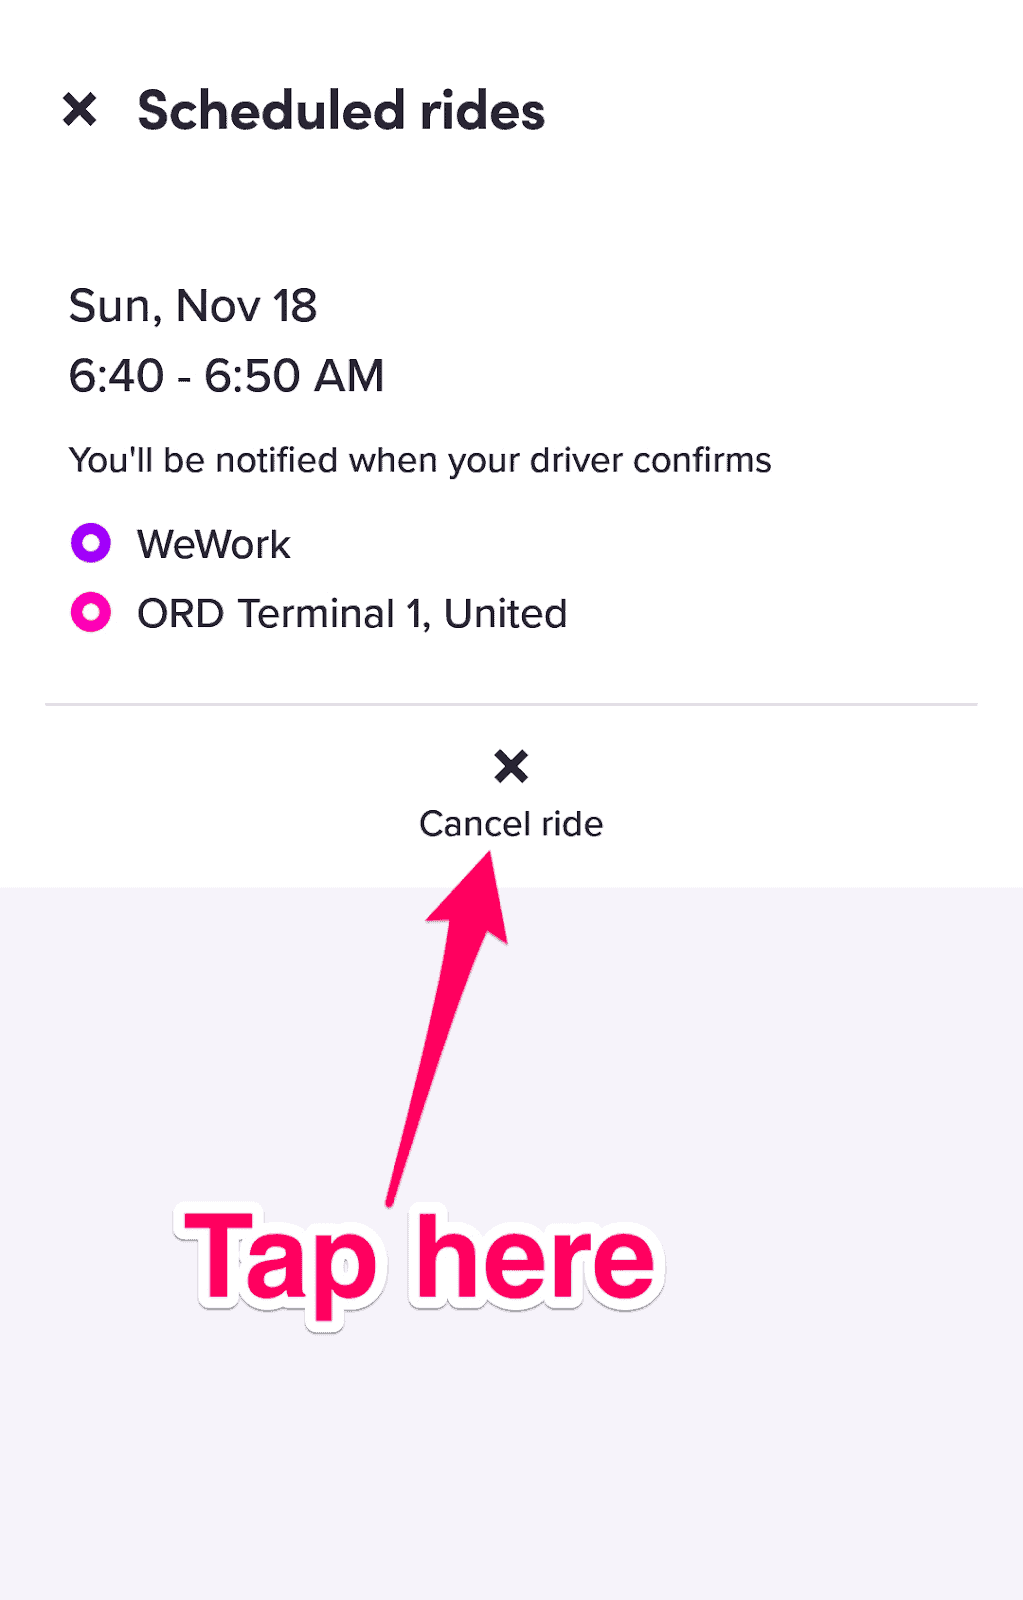 How to Schedule a Lyft Ride - Cancel ride